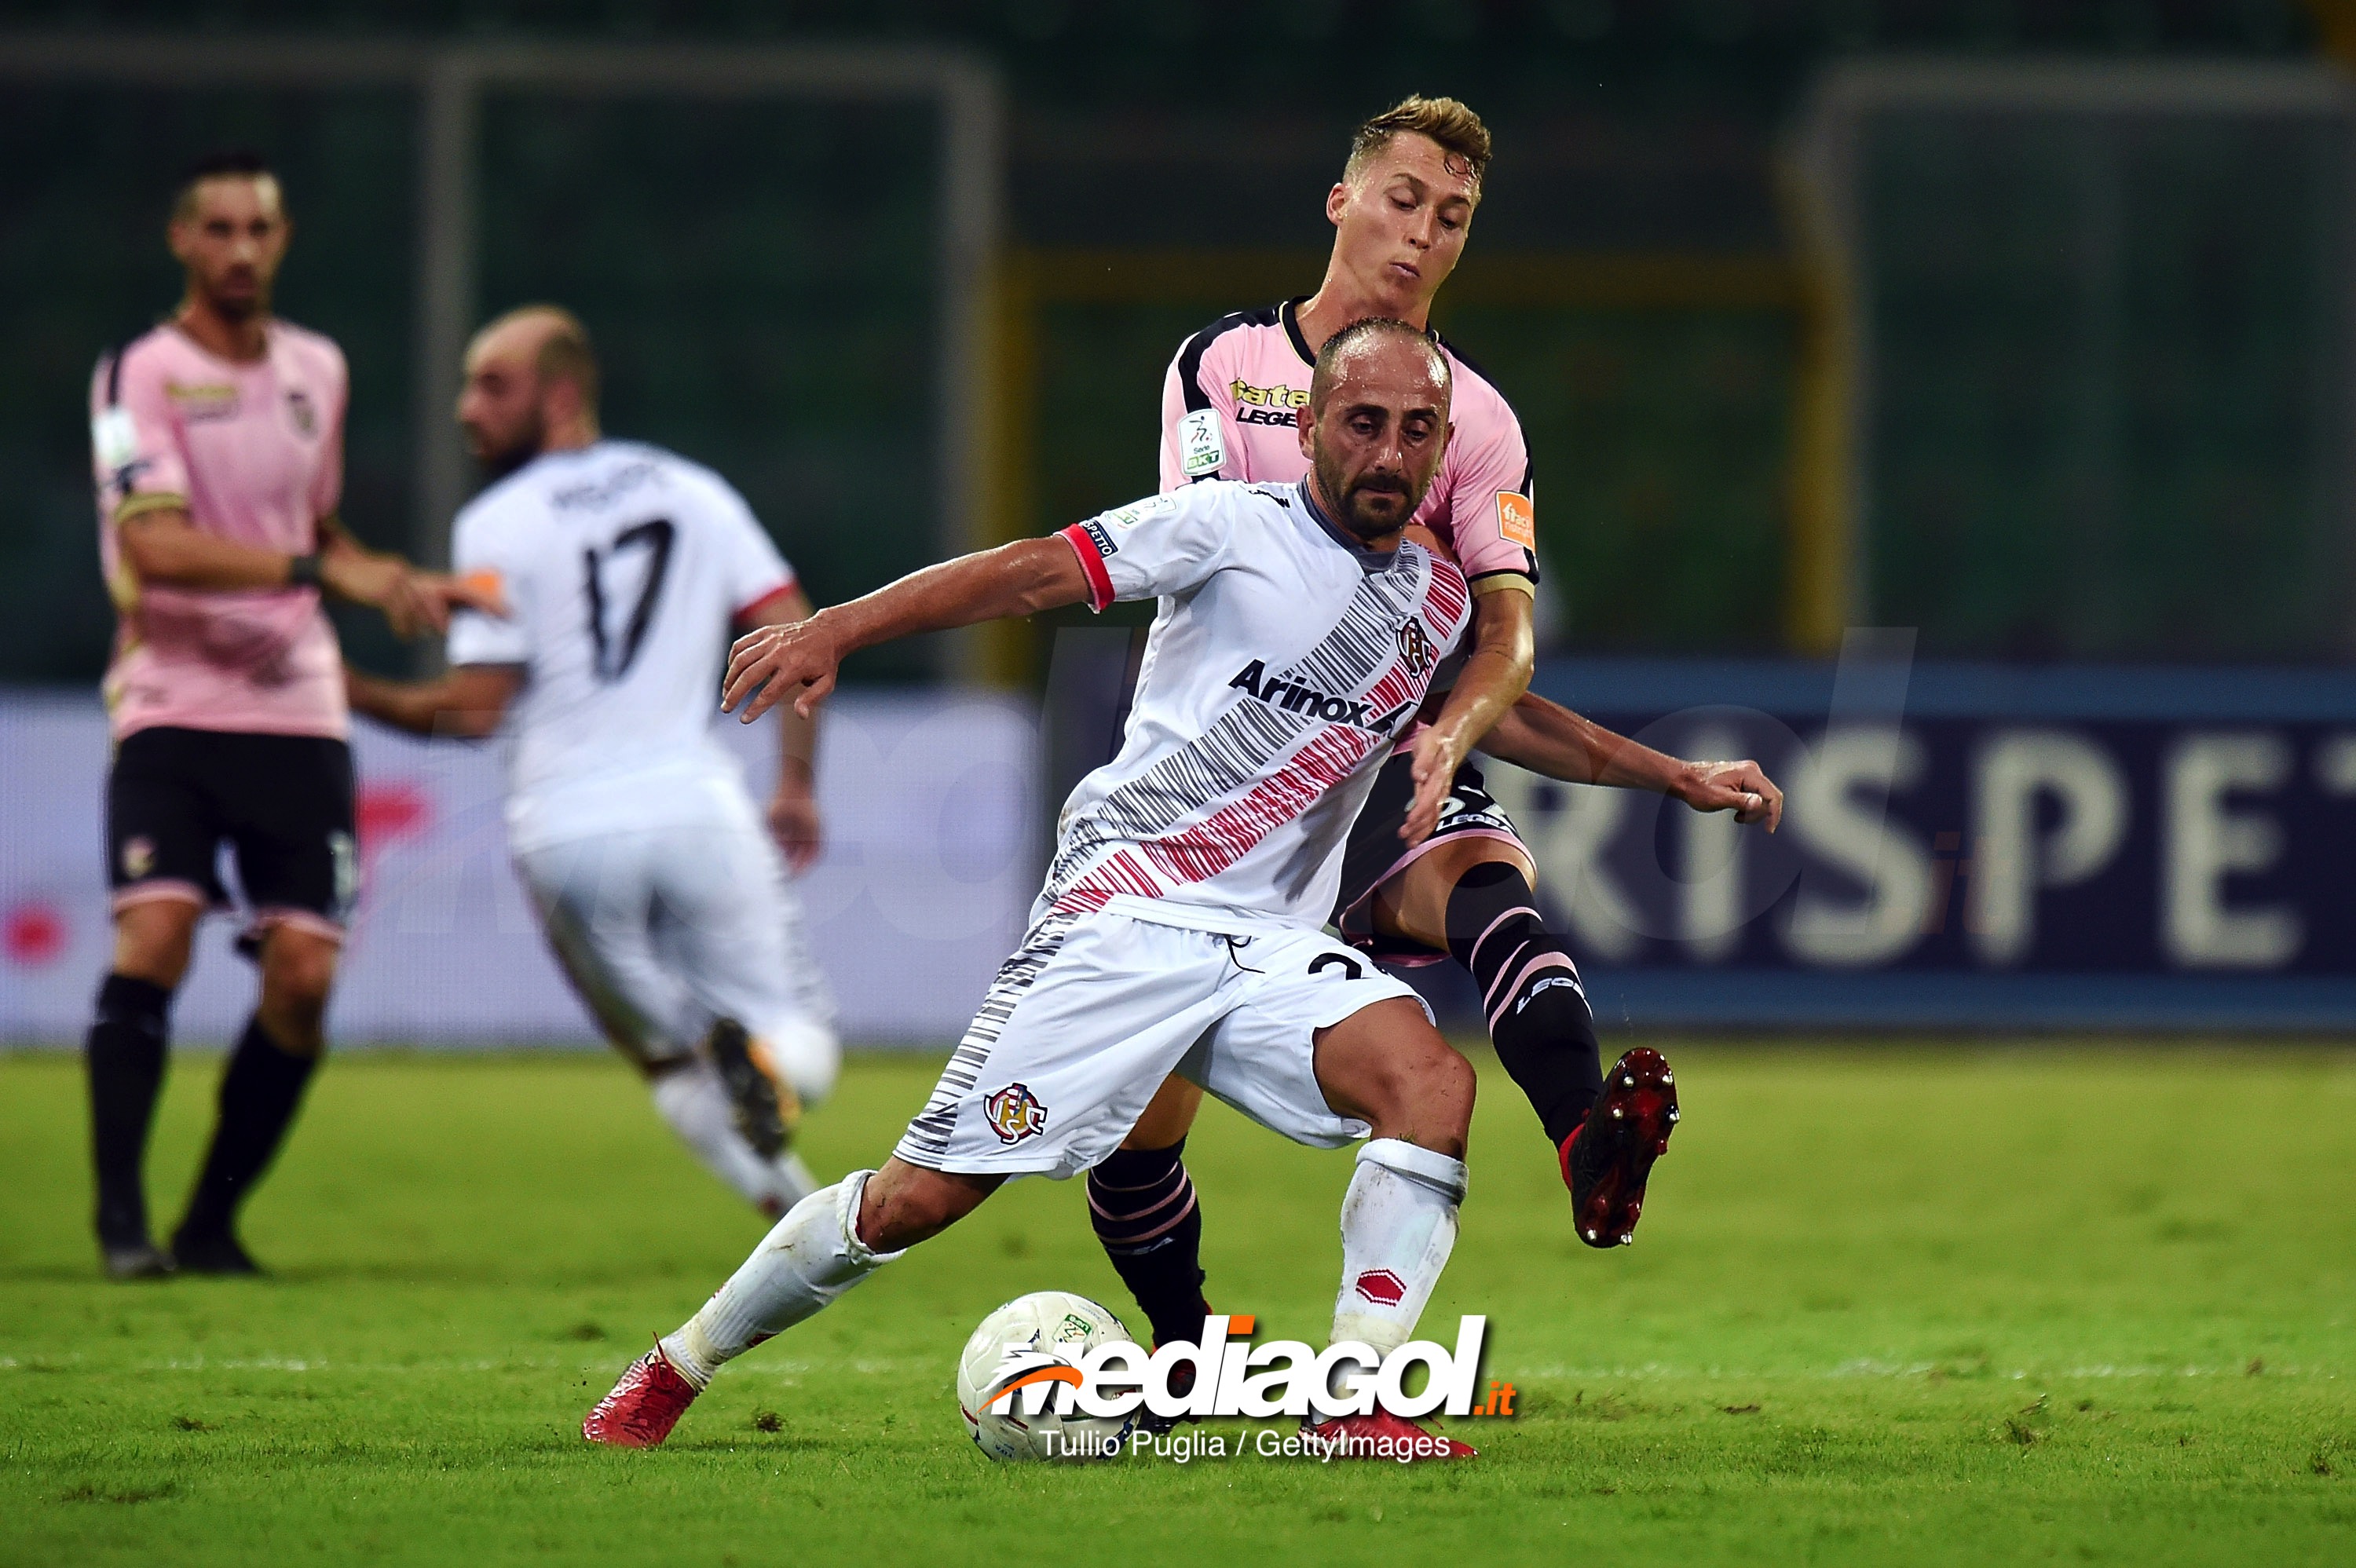 PALERMO, ITALY - AUGUST 31:  Giampietro Perulli (L)  of Cremonese and Nicolas Haas of Palermo compete for the ball during the Serie B match between US Citta' di Palermo and US Cremonese at Stadio Renzo Barbera on August 31, 2018 in Palermo, Italy.  (Photo by Tullio M. Puglia/Getty Images)